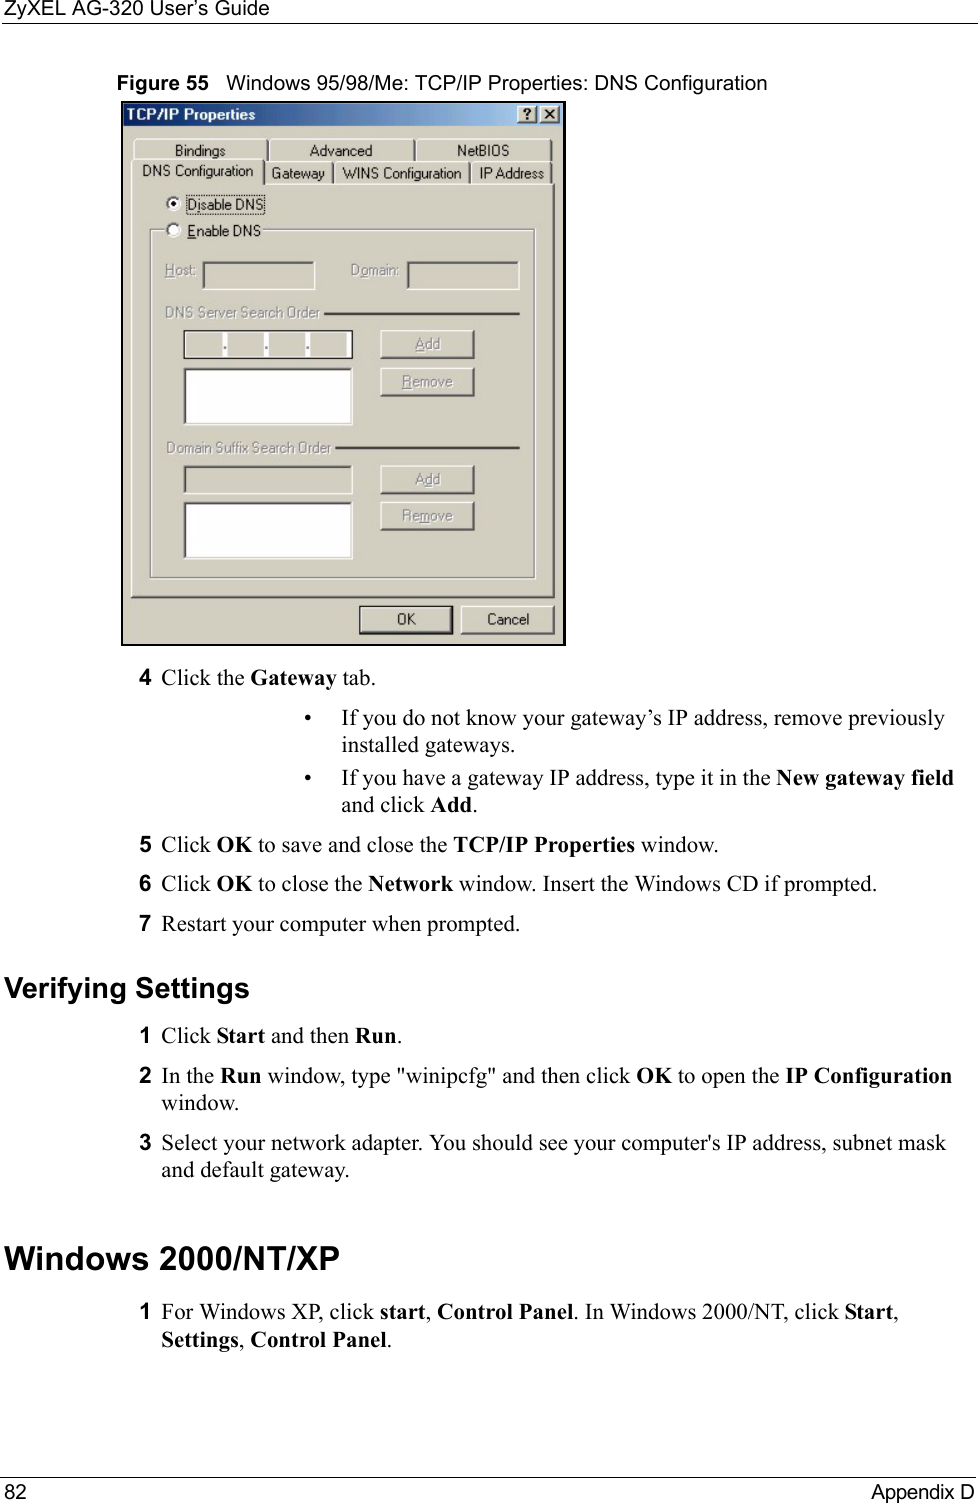 ZyXEL AG-320 User’s Guide82 Appendix DFigure 55   Windows 95/98/Me: TCP/IP Properties: DNS Configuration4Click the Gateway tab.• If you do not know your gateway’s IP address, remove previously installed gateways.• If you have a gateway IP address, type it in the New gateway field and click Add.5Click OK to save and close the TCP/IP Properties window.6Click OK to close the Network window. Insert the Windows CD if prompted.7Restart your computer when prompted.Verifying Settings1Click Start and then Run.2In the Run window, type &quot;winipcfg&quot; and then click OK to open the IP Configuration window.3Select your network adapter. You should see your computer&apos;s IP address, subnet mask and default gateway.Windows 2000/NT/XP1For Windows XP, click start, Control Panel. In Windows 2000/NT, click Start, Settings, Control Panel.